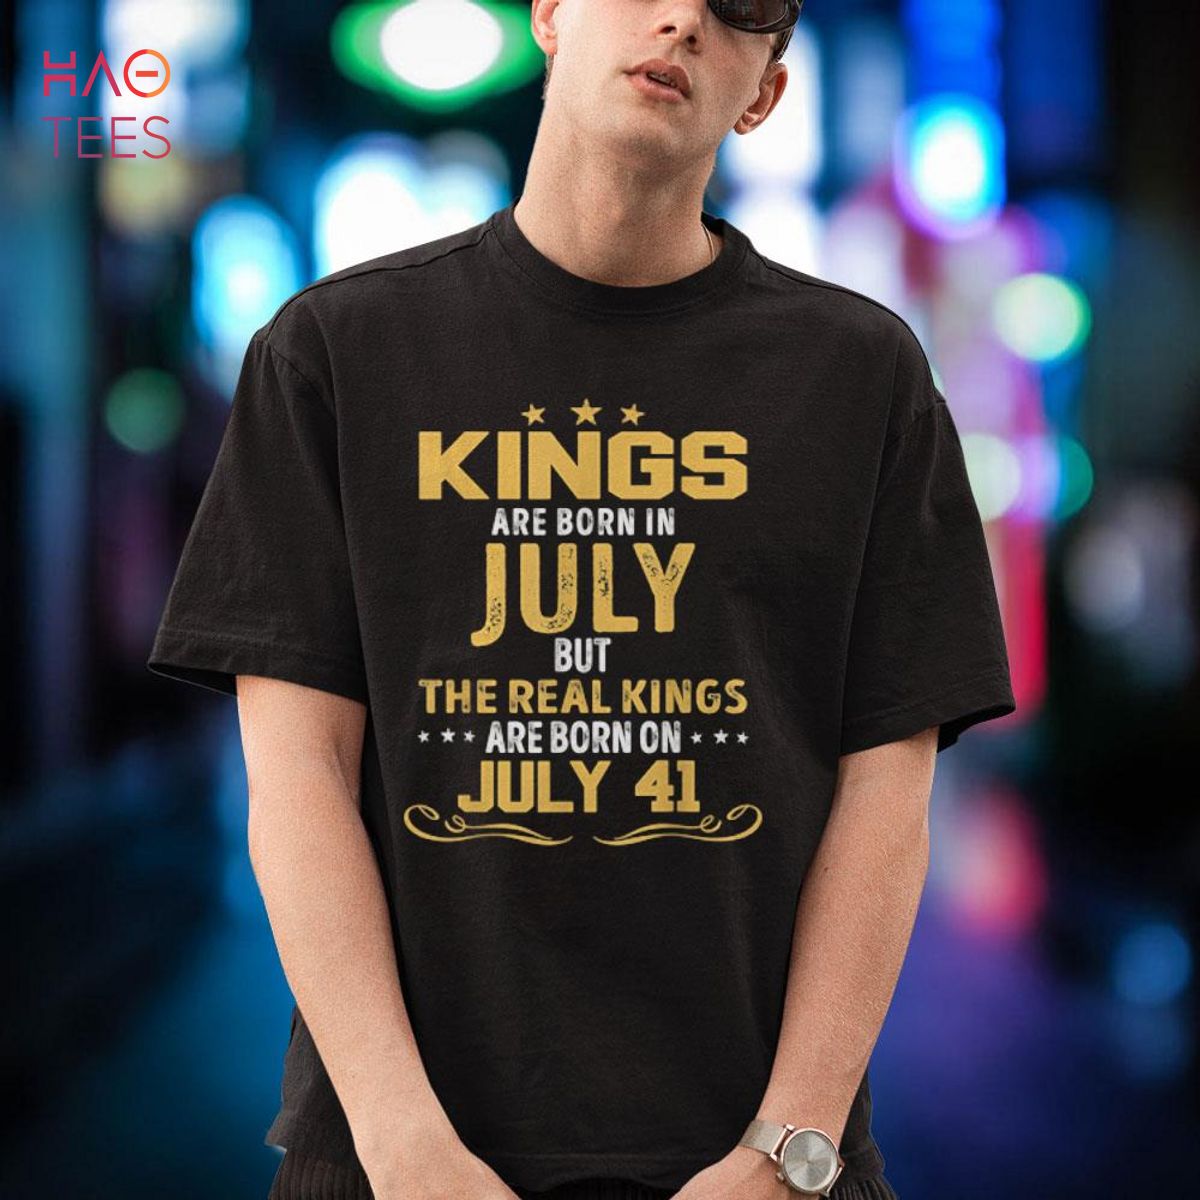 Kings Are Born In July The Real Kings Are Born On July 41